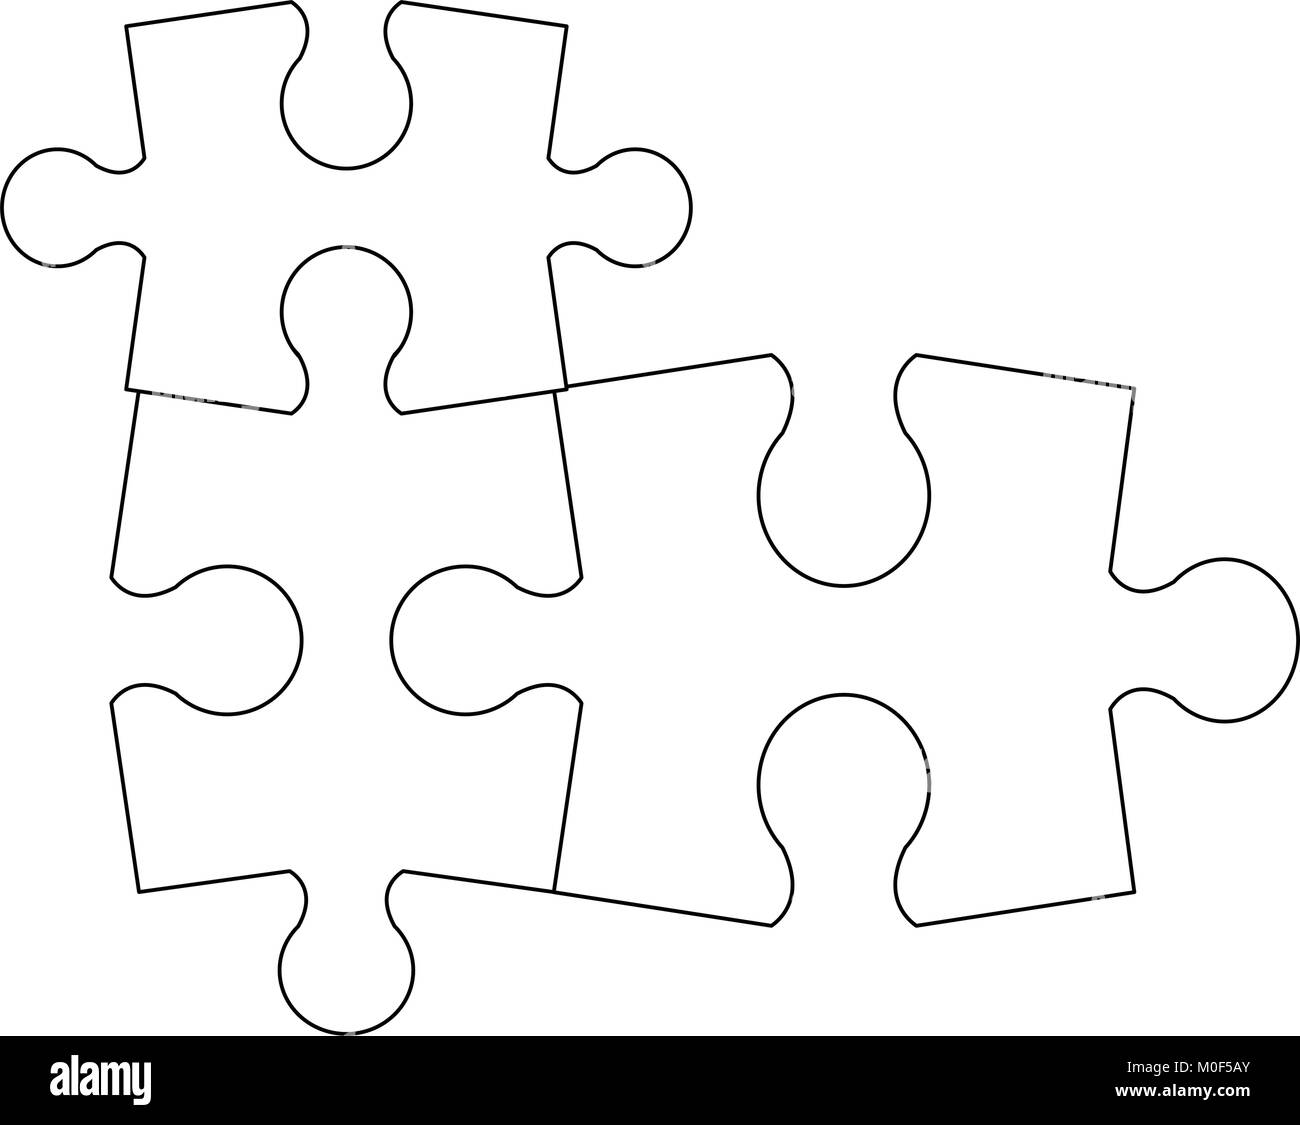 Blank Jigsaw Puzzle 9 pieces. Simple line art style for printing and web.  Stock vector illustration, Stock vector